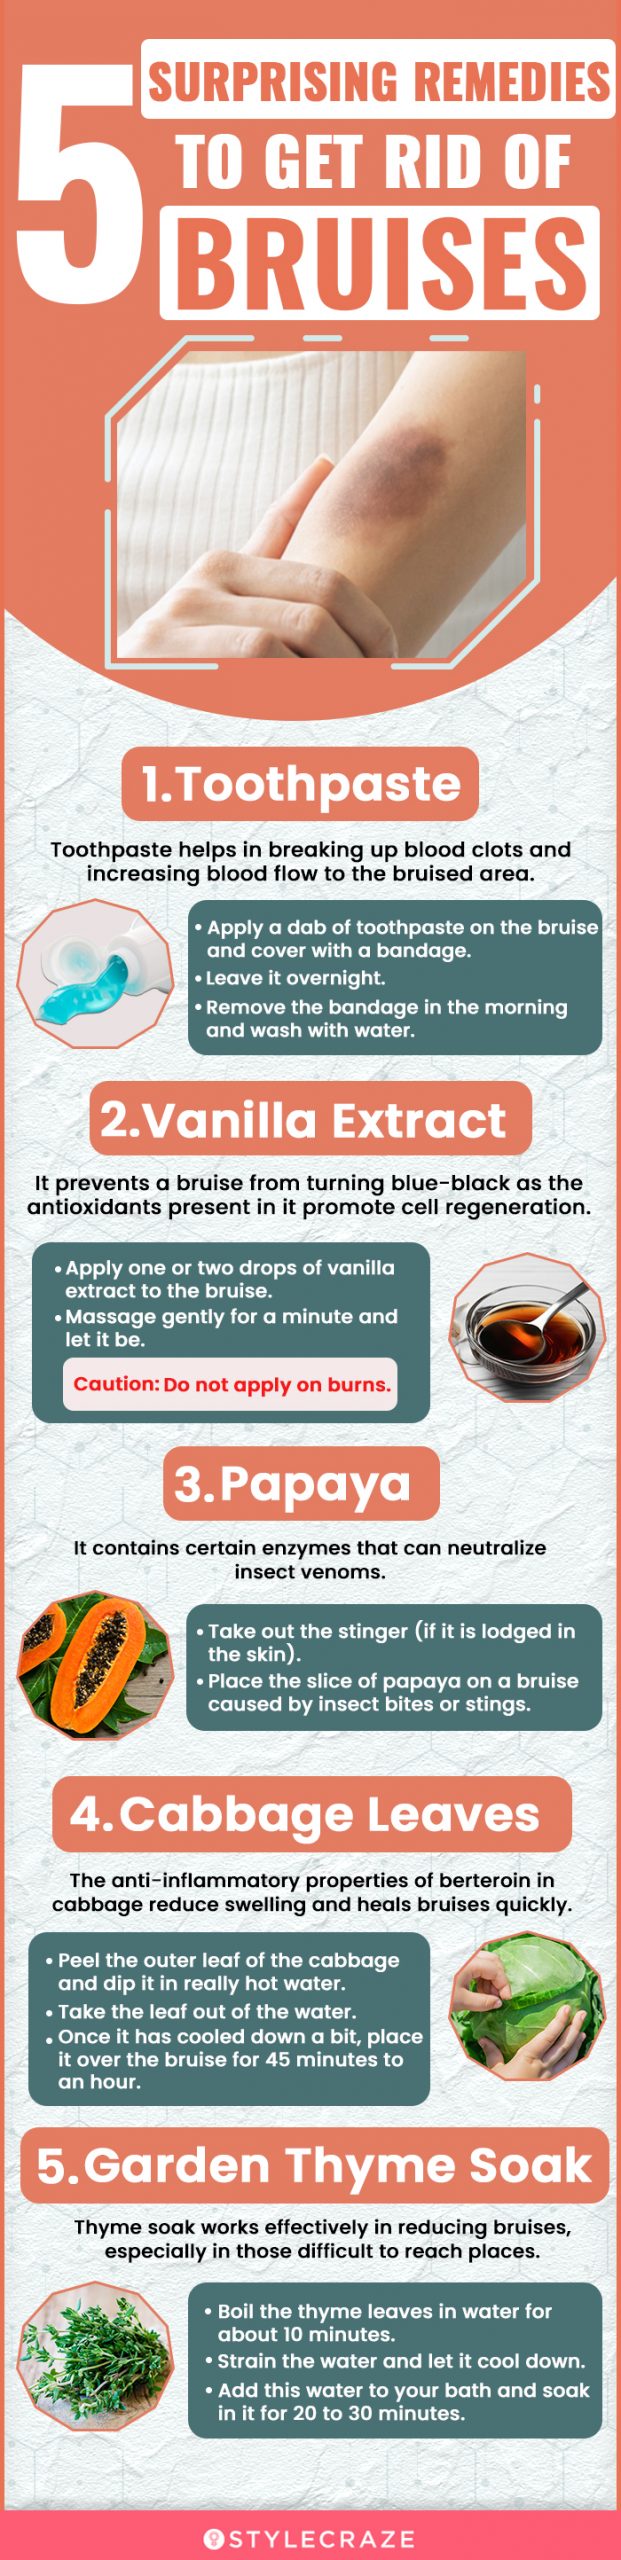 5 surprising remedies to get rid of bruises (infographic)